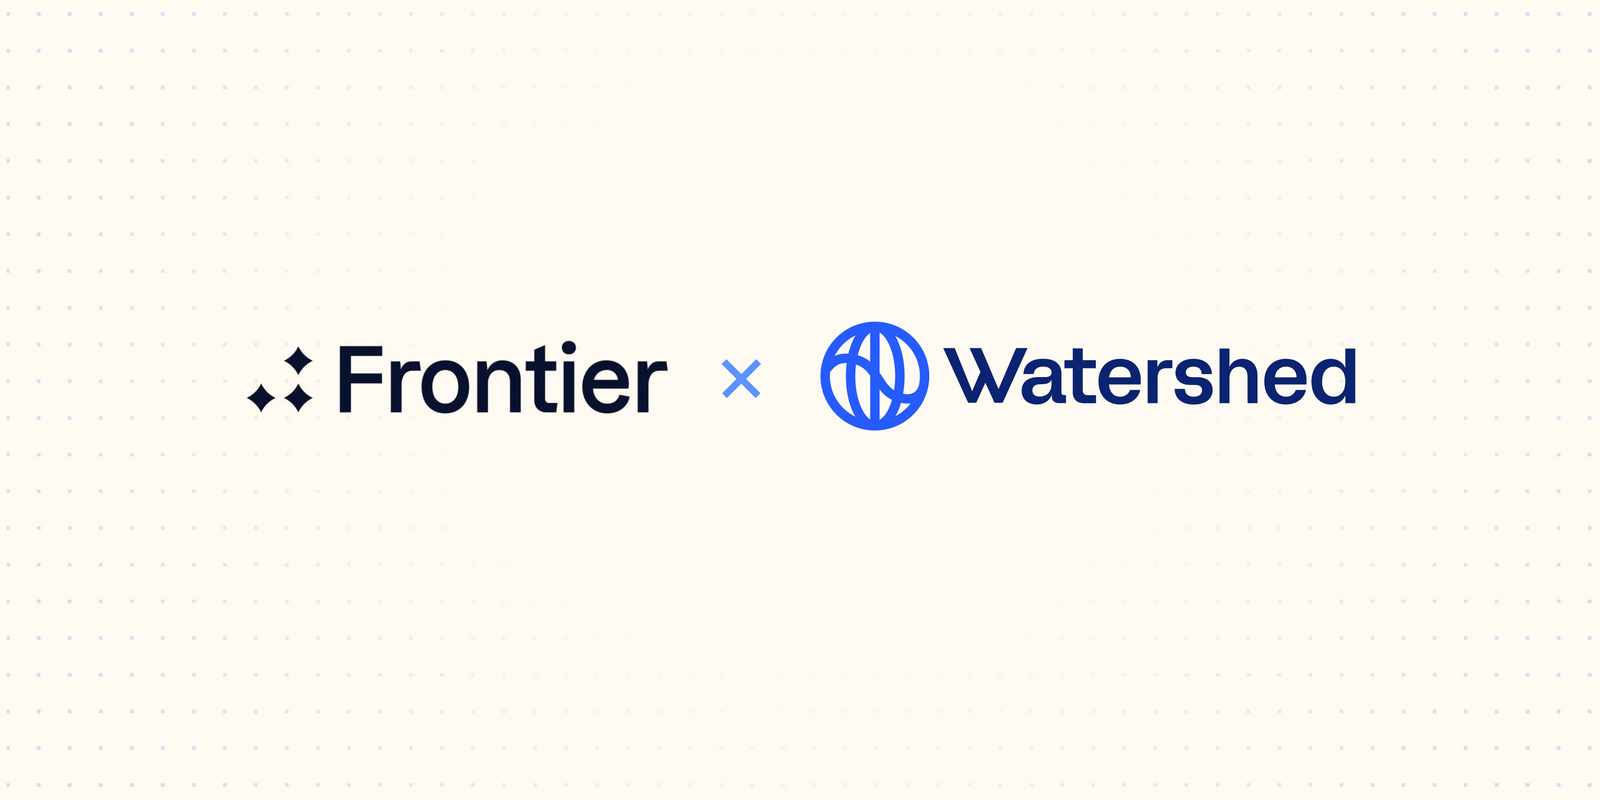 Frontier x Watershed logos